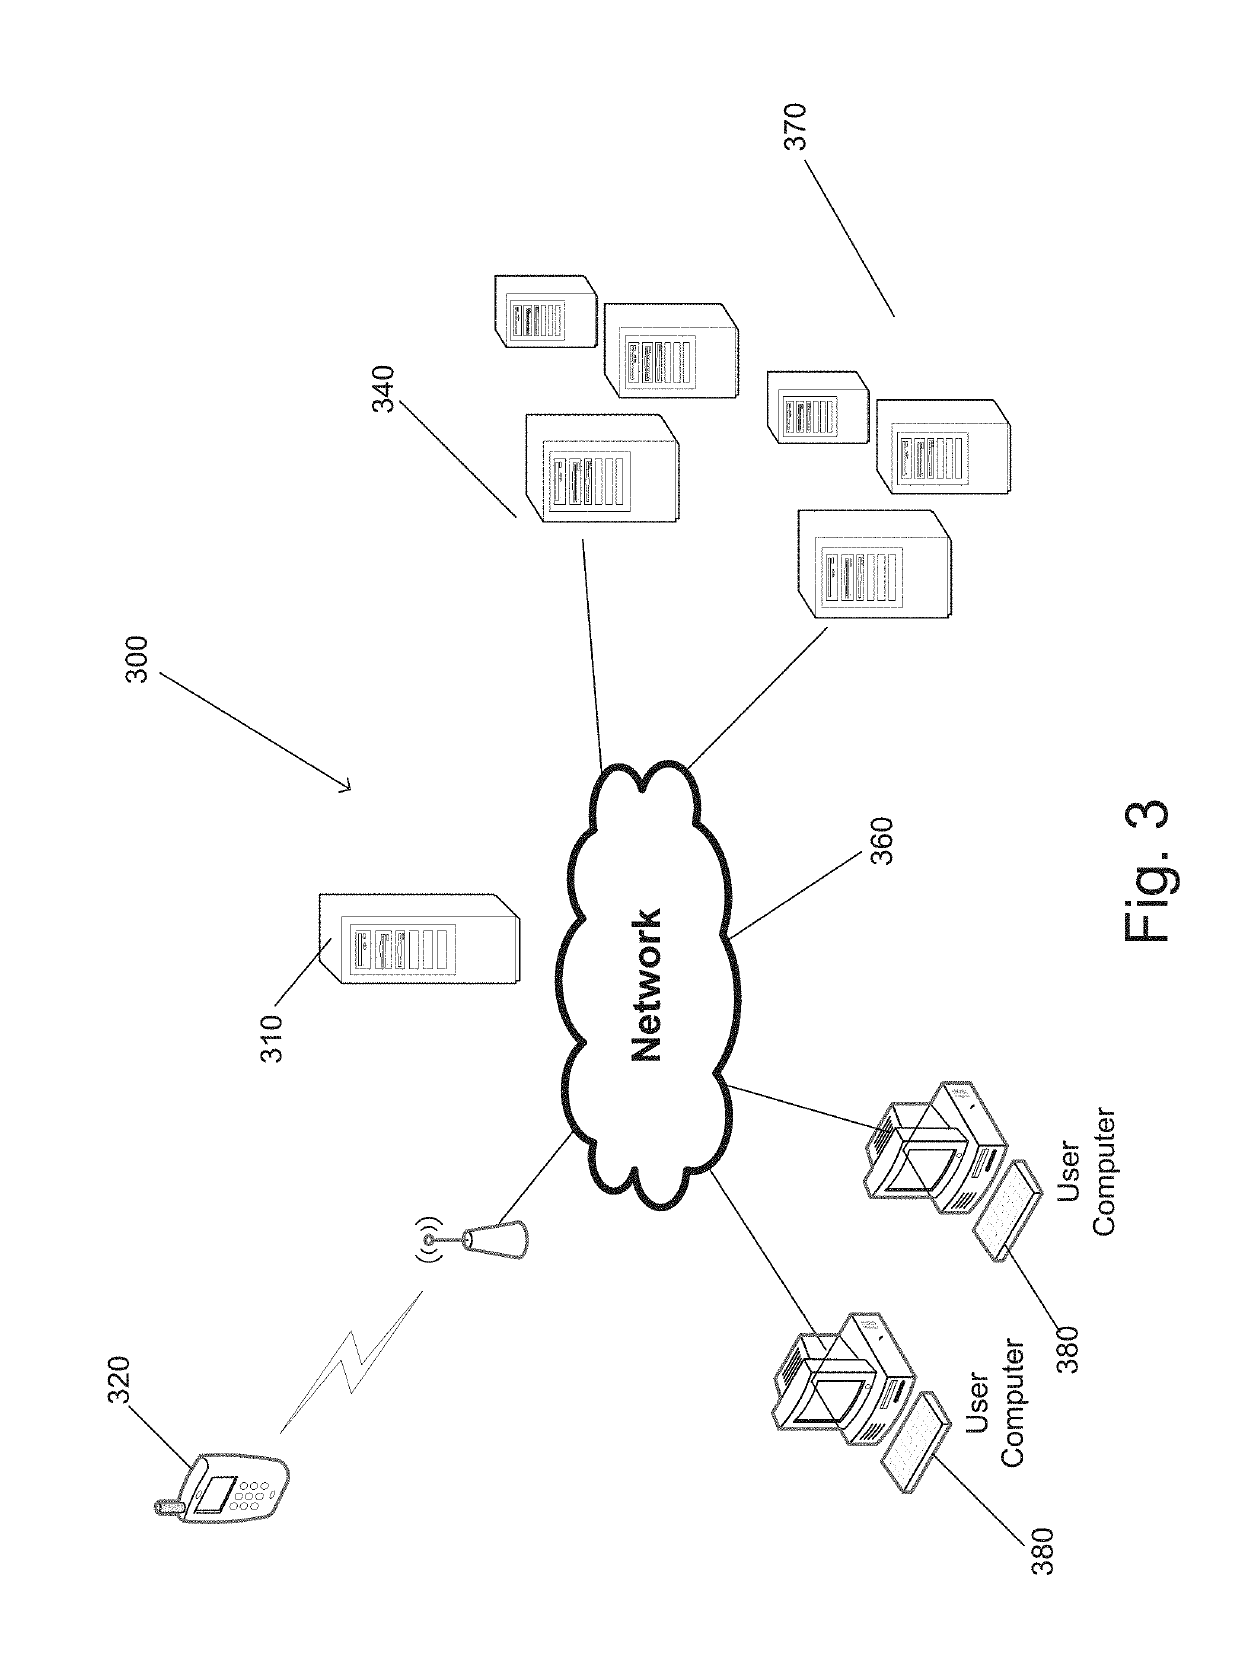 Machine Learning and Molecular Simulation Based Methods for Enhancing Binding and Activity Prediction